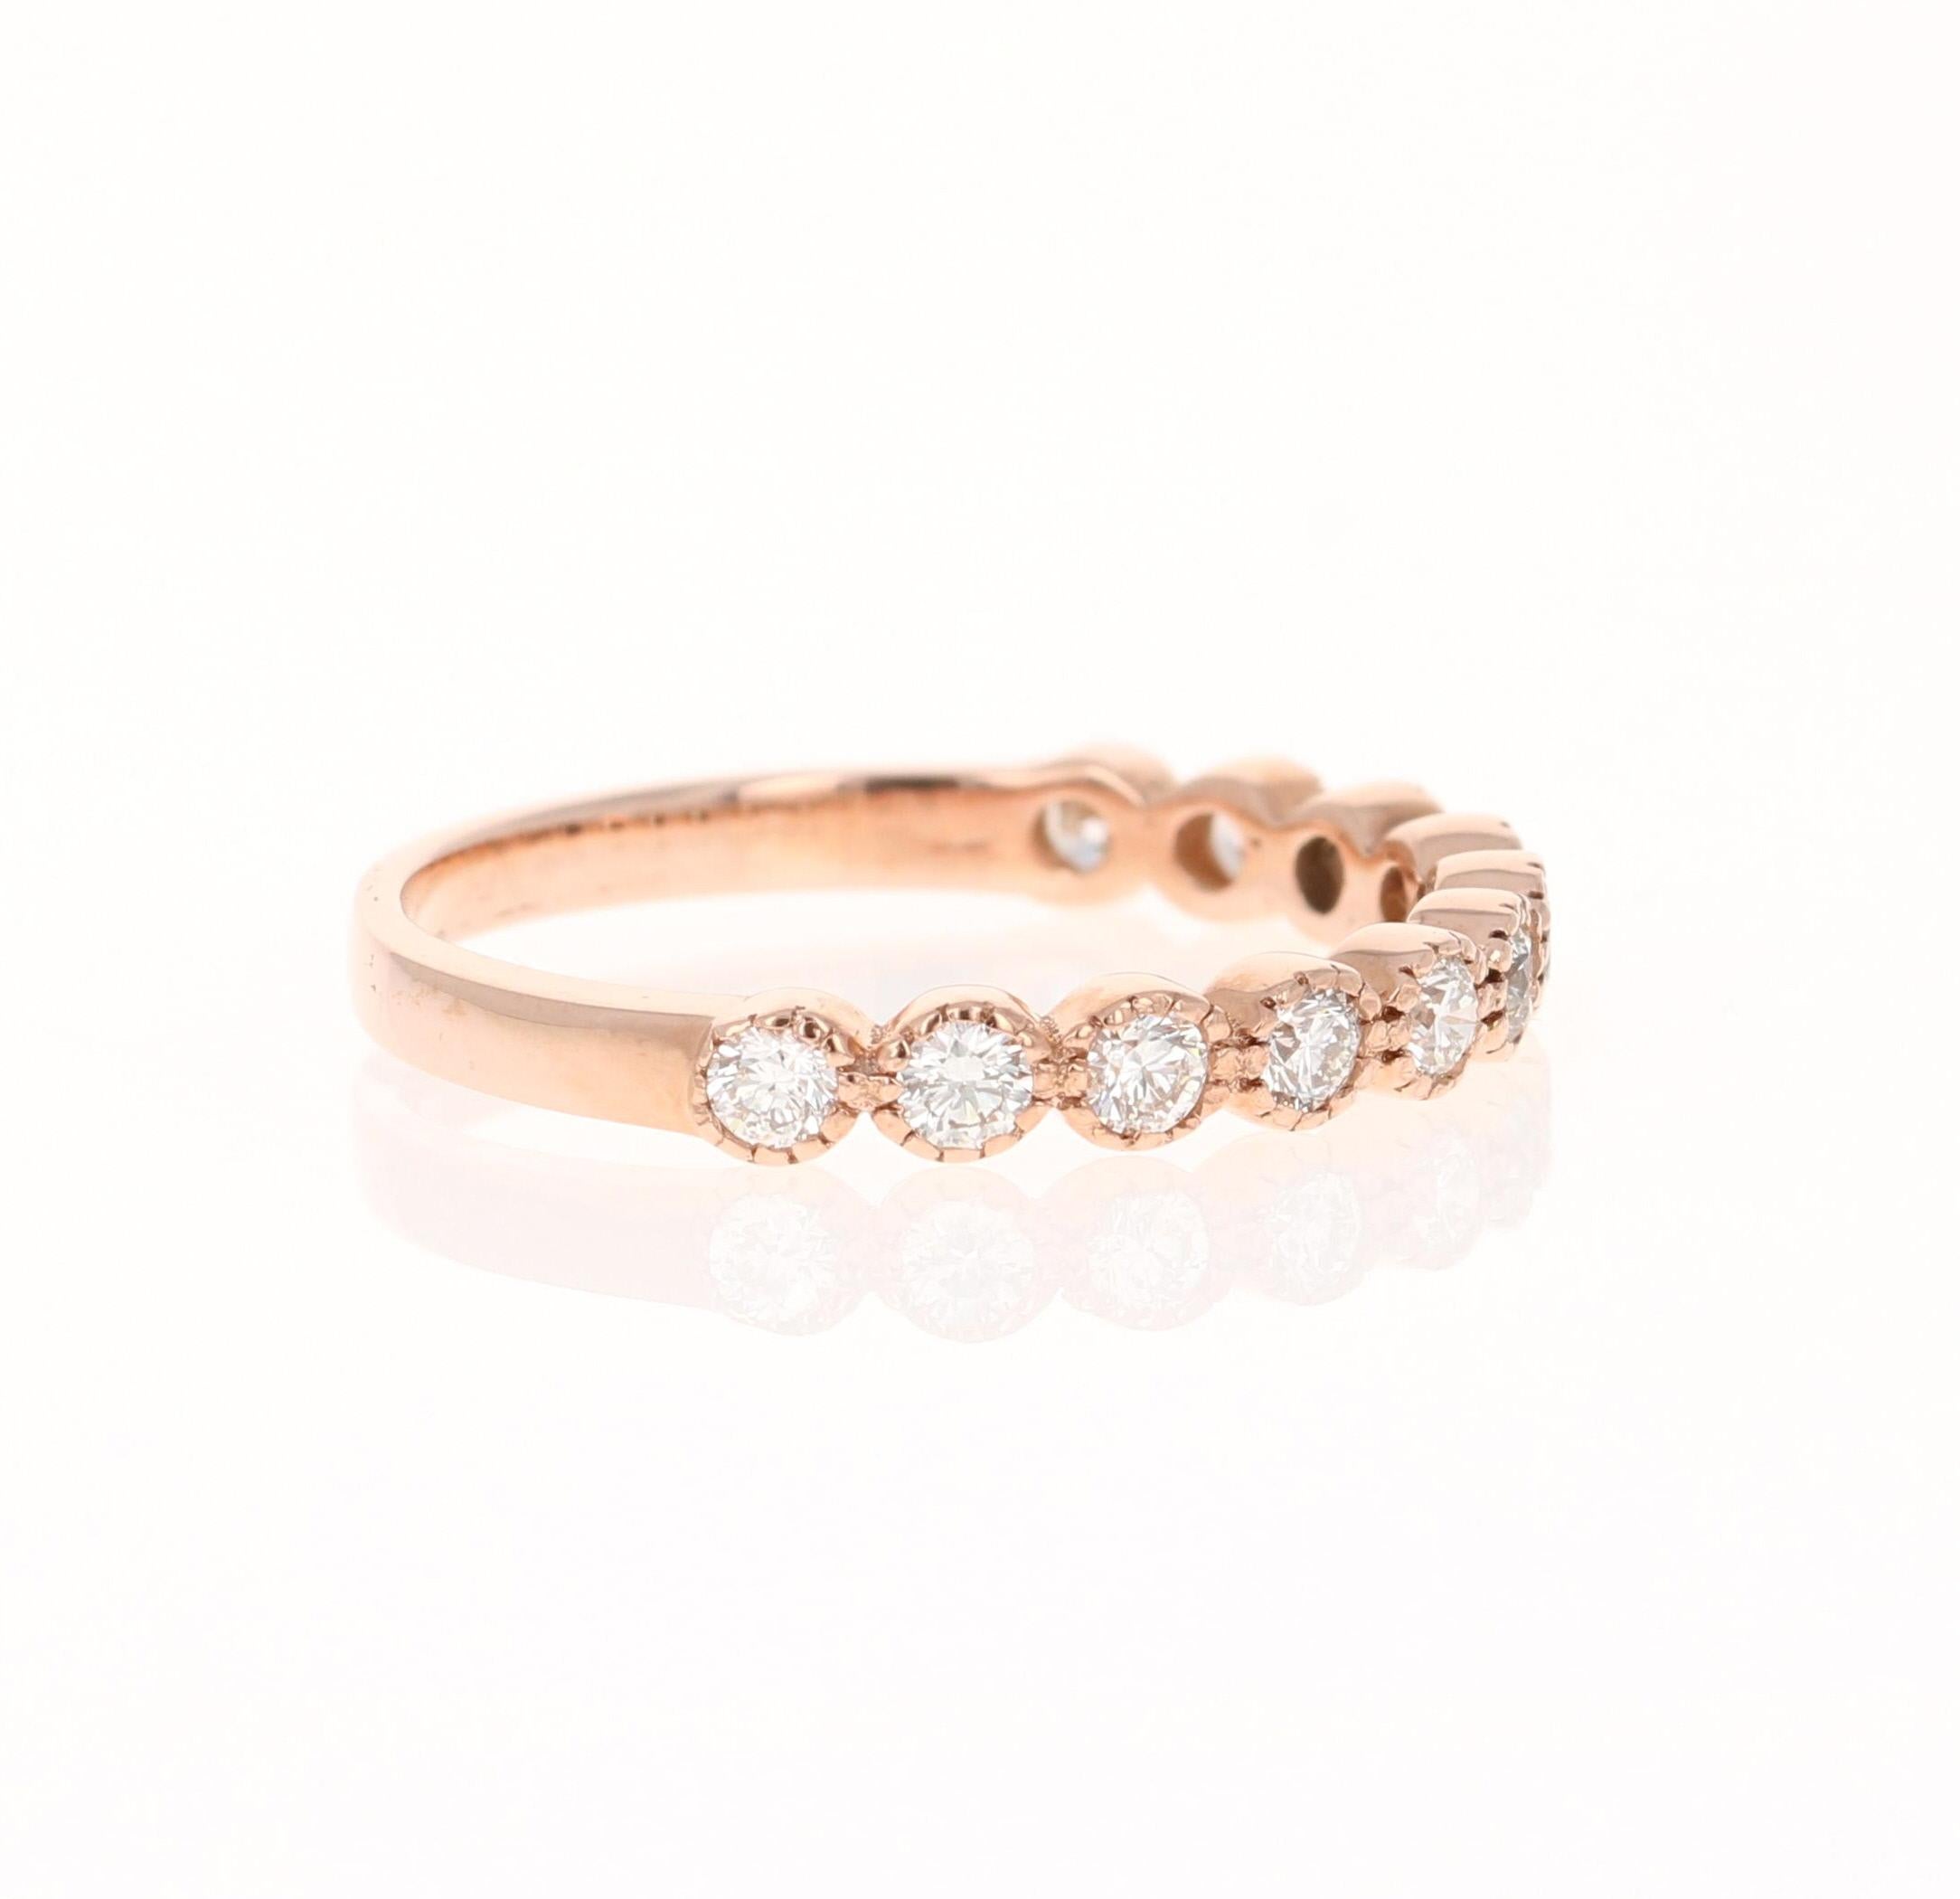 A beautiful band that can be worn as a single band or stack with other bands in other colors of Gold 

This ring has 11 Round Cut Diamonds that weigh 0.44 Carats. The clarity and color of the diamonds are VS-H.

Crafted in 14 Karat Rose Gold and has